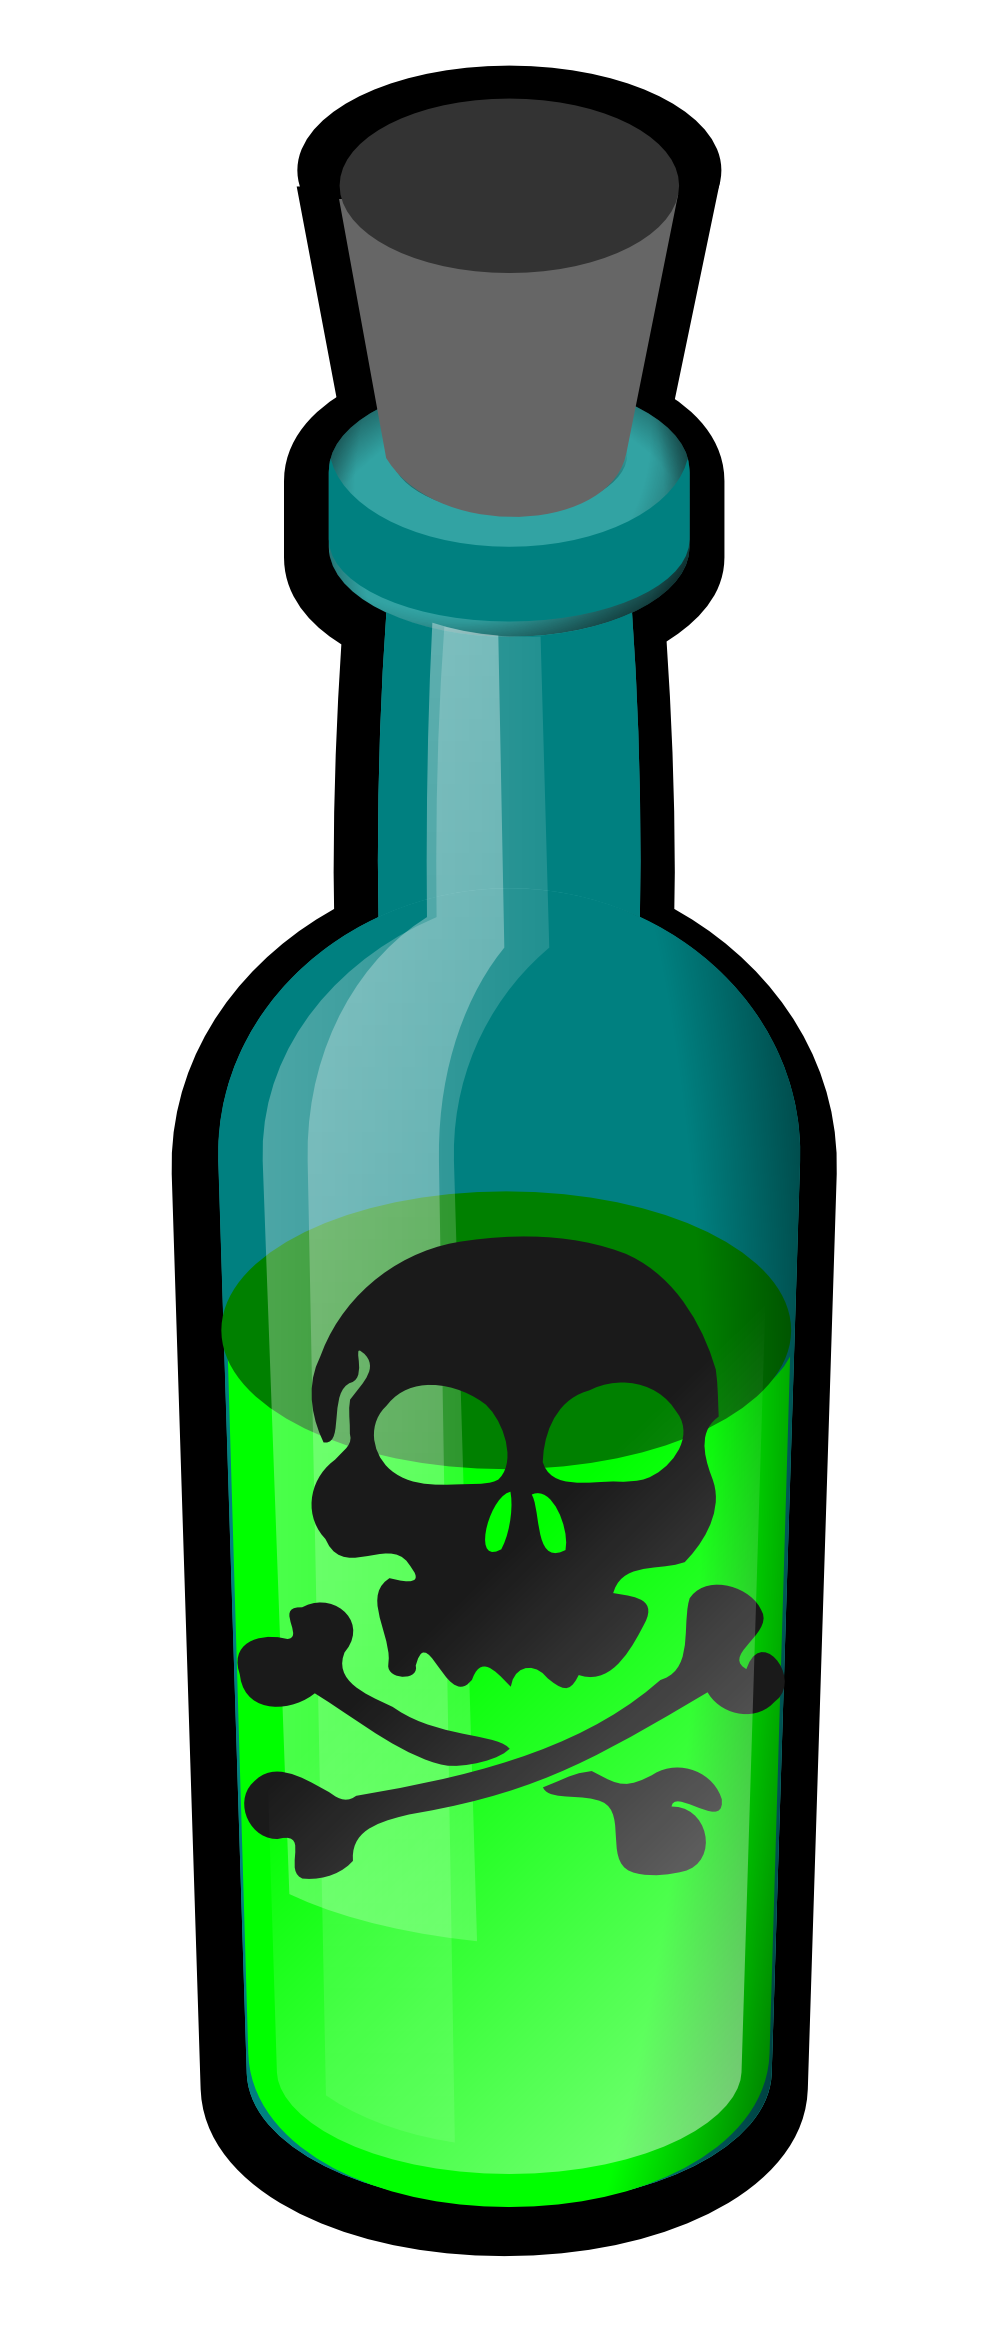 Poison clip art free. Drinking clipart alcohol poisoning